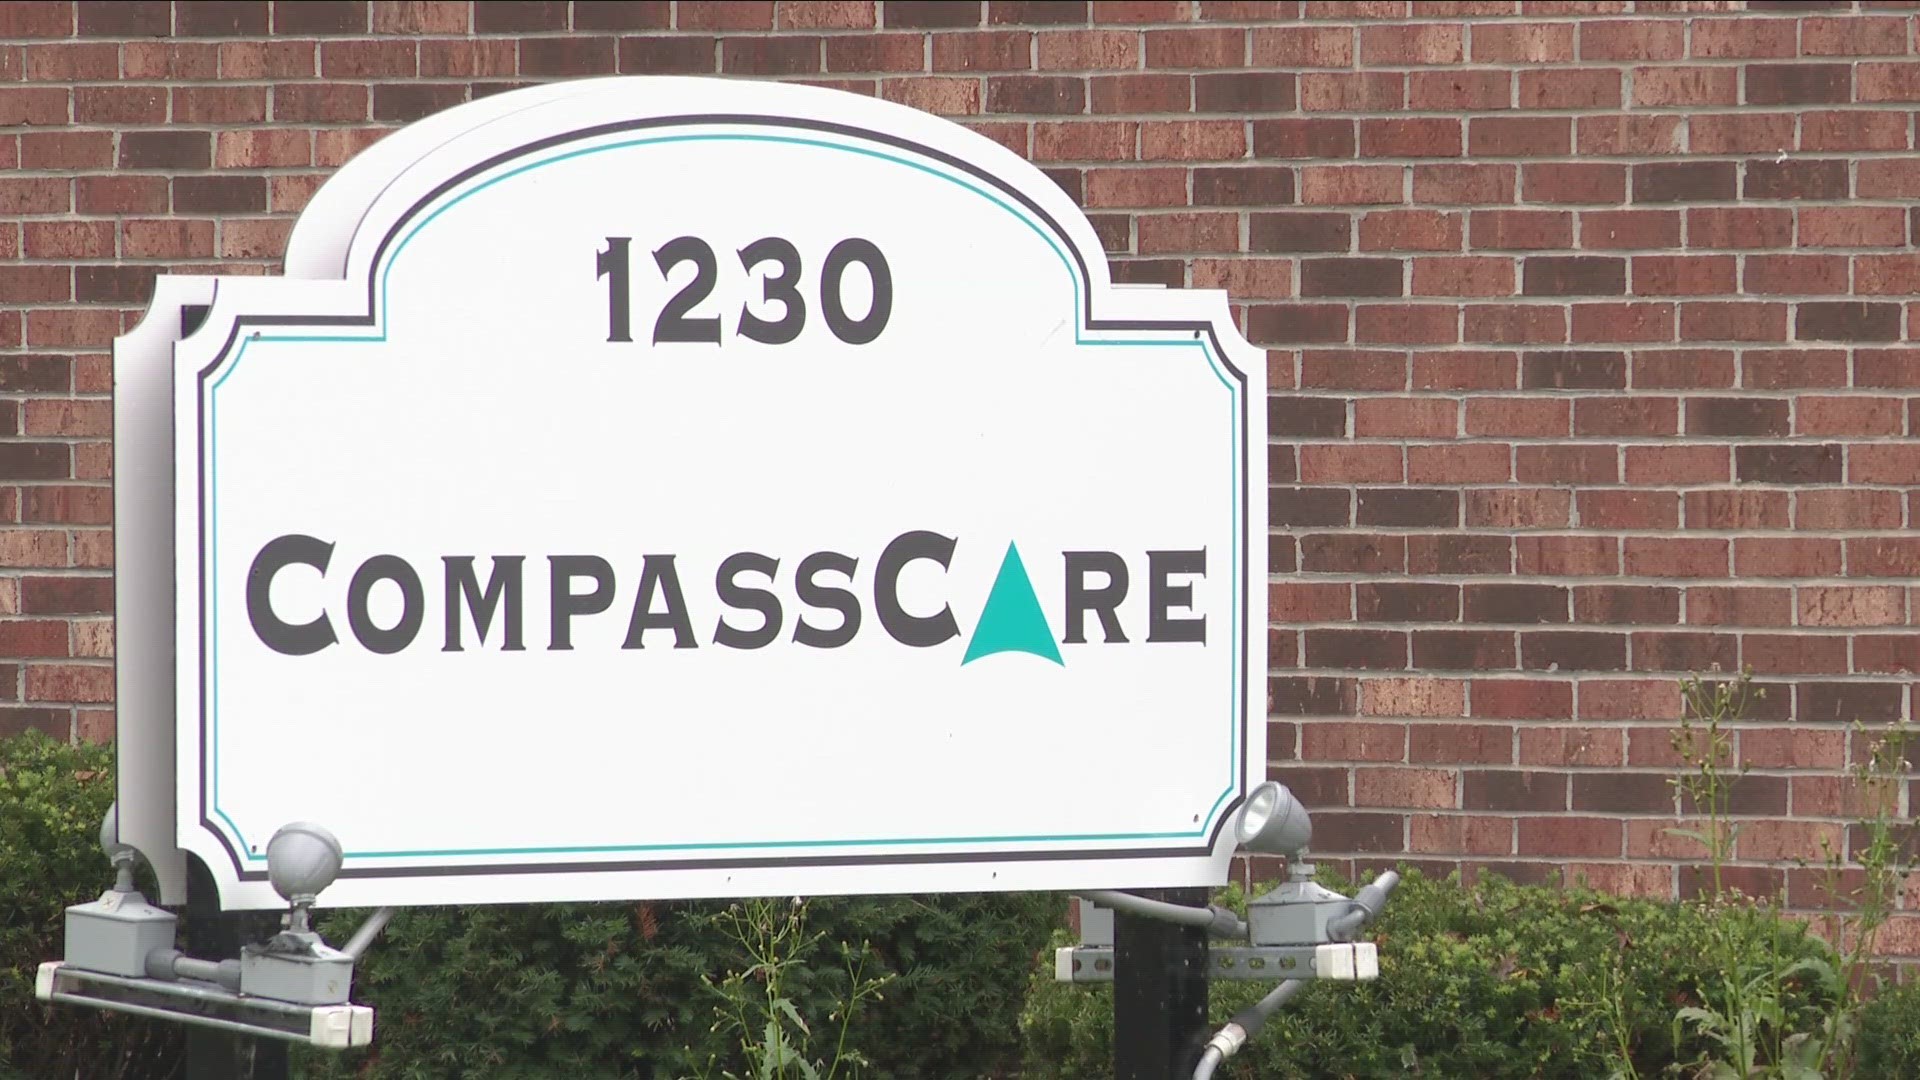 Meanwhile, a 25-thousand dollar reward remains for information leading to the arrest of persons who firebombed Compass care's facility in June of 2022